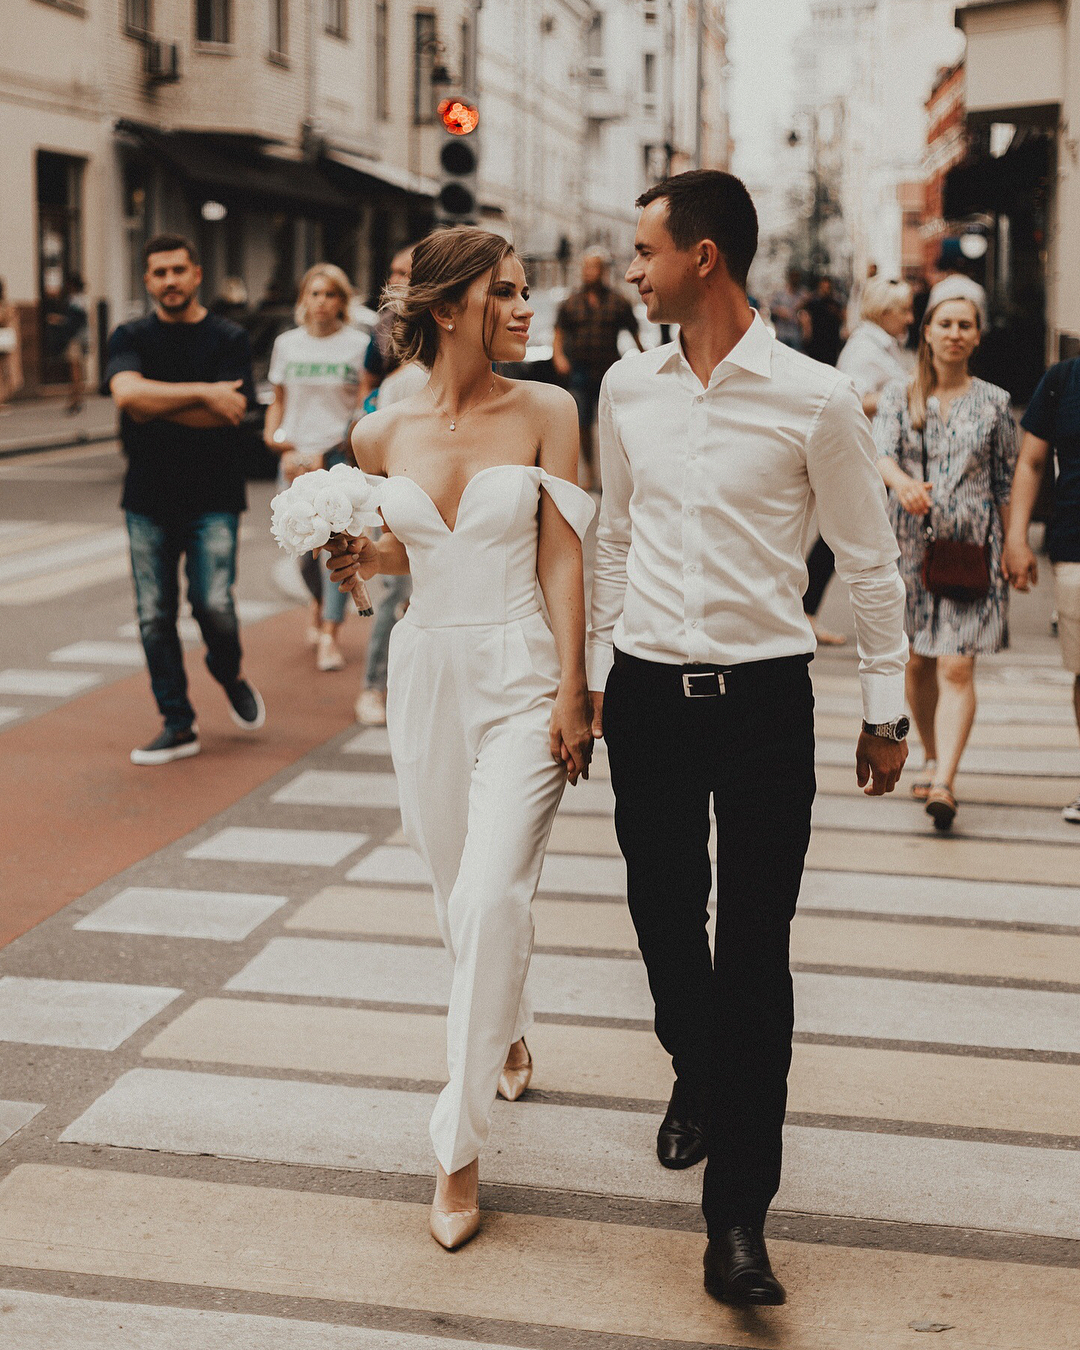 Modern bride look for a courthouse wedding celebration. Off-the-shoulder jumpsuit and all white flowers small bouquet. // See more: 20 Stunning Civil Wedding Outfit Ideas to Make it Official In Style. // mysweetengagement.com